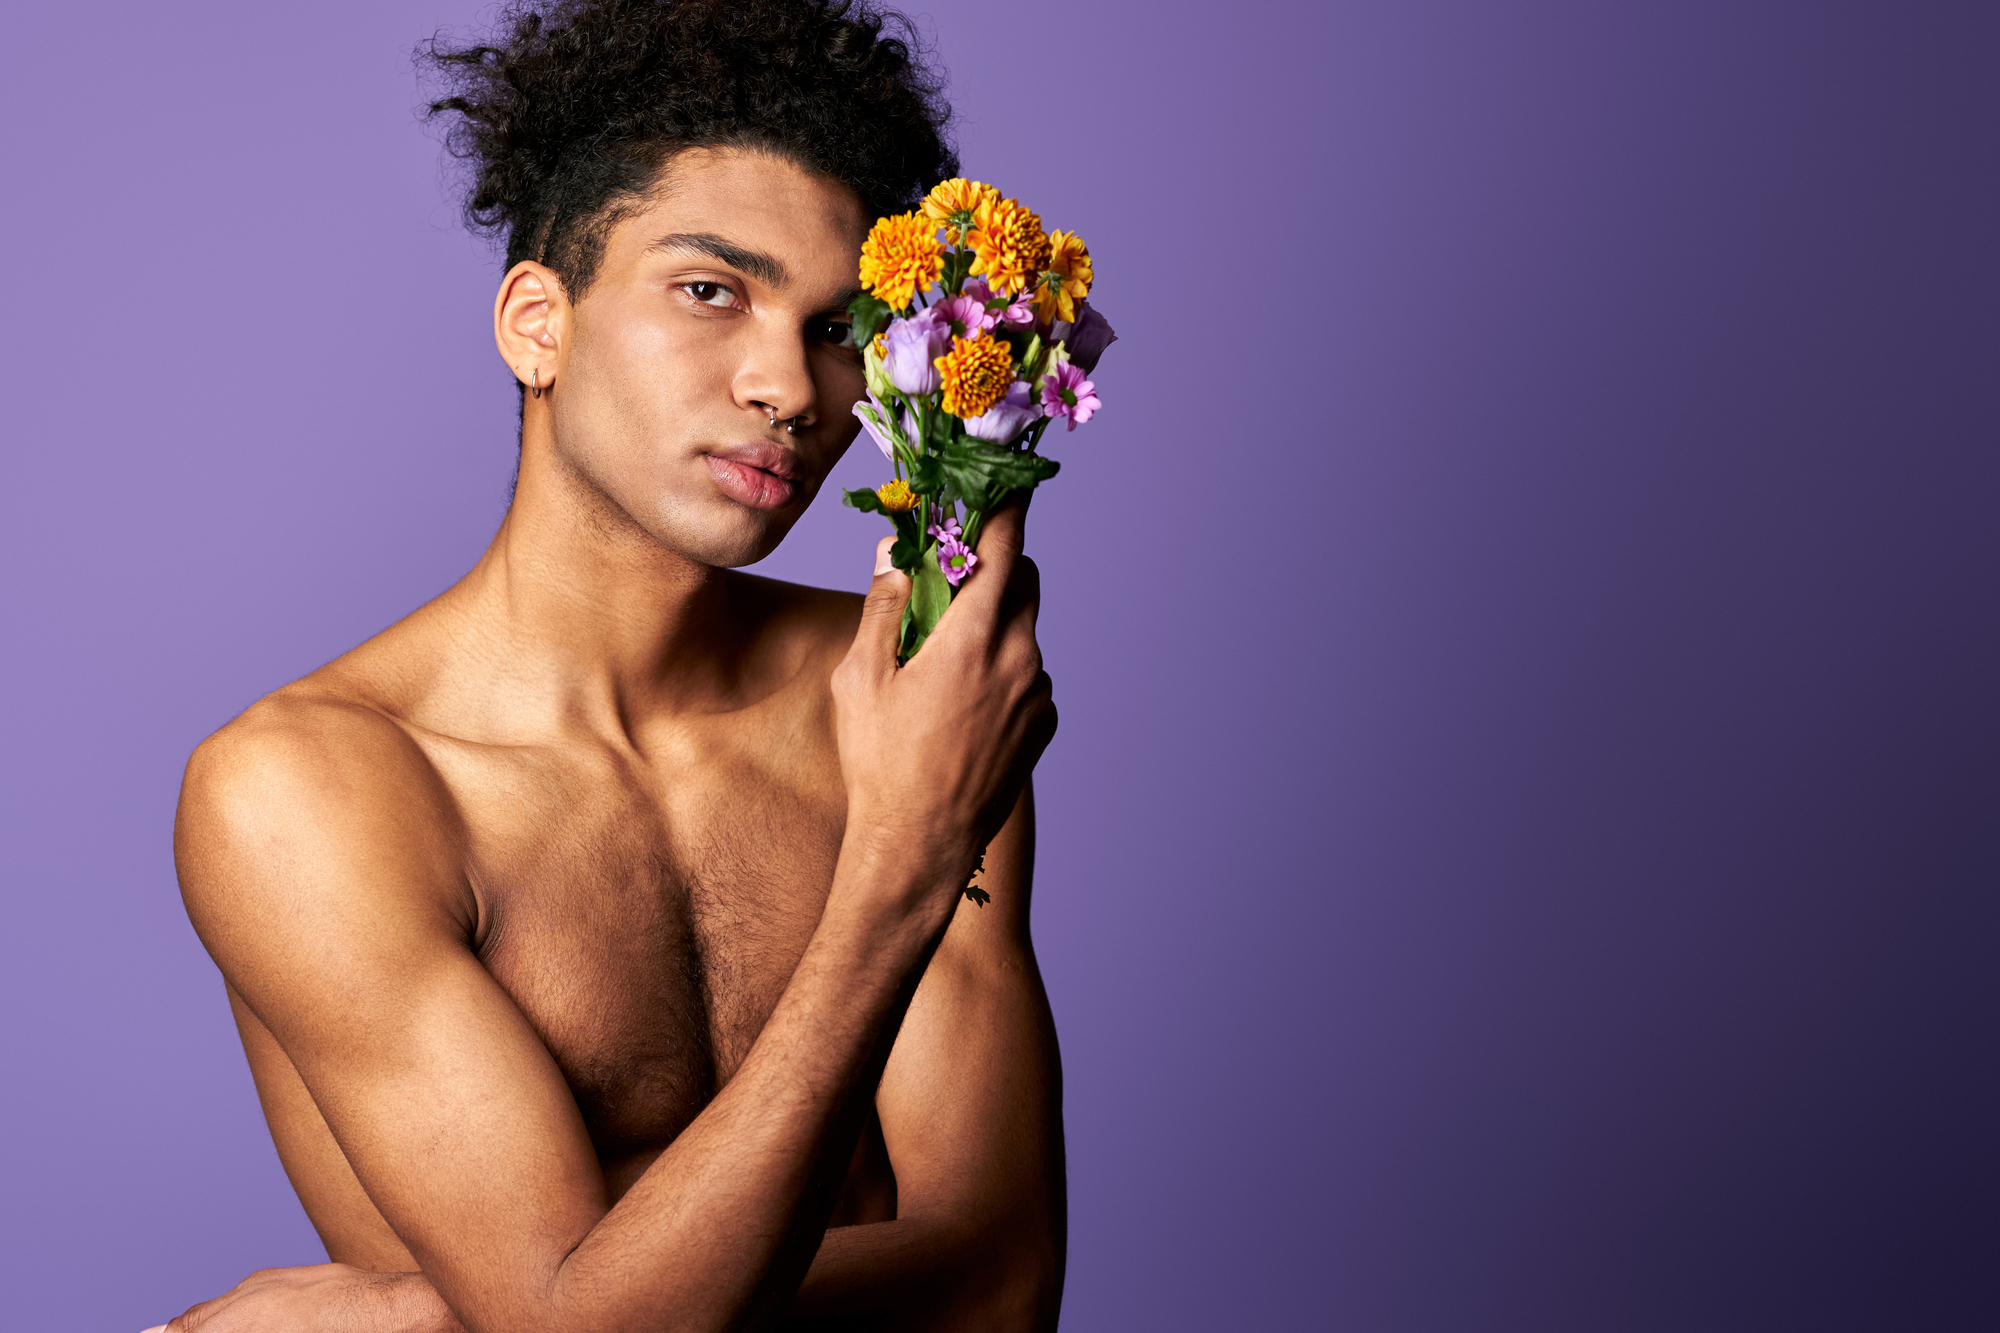 Nacked hispanic man with flowers - poses for portrait photography